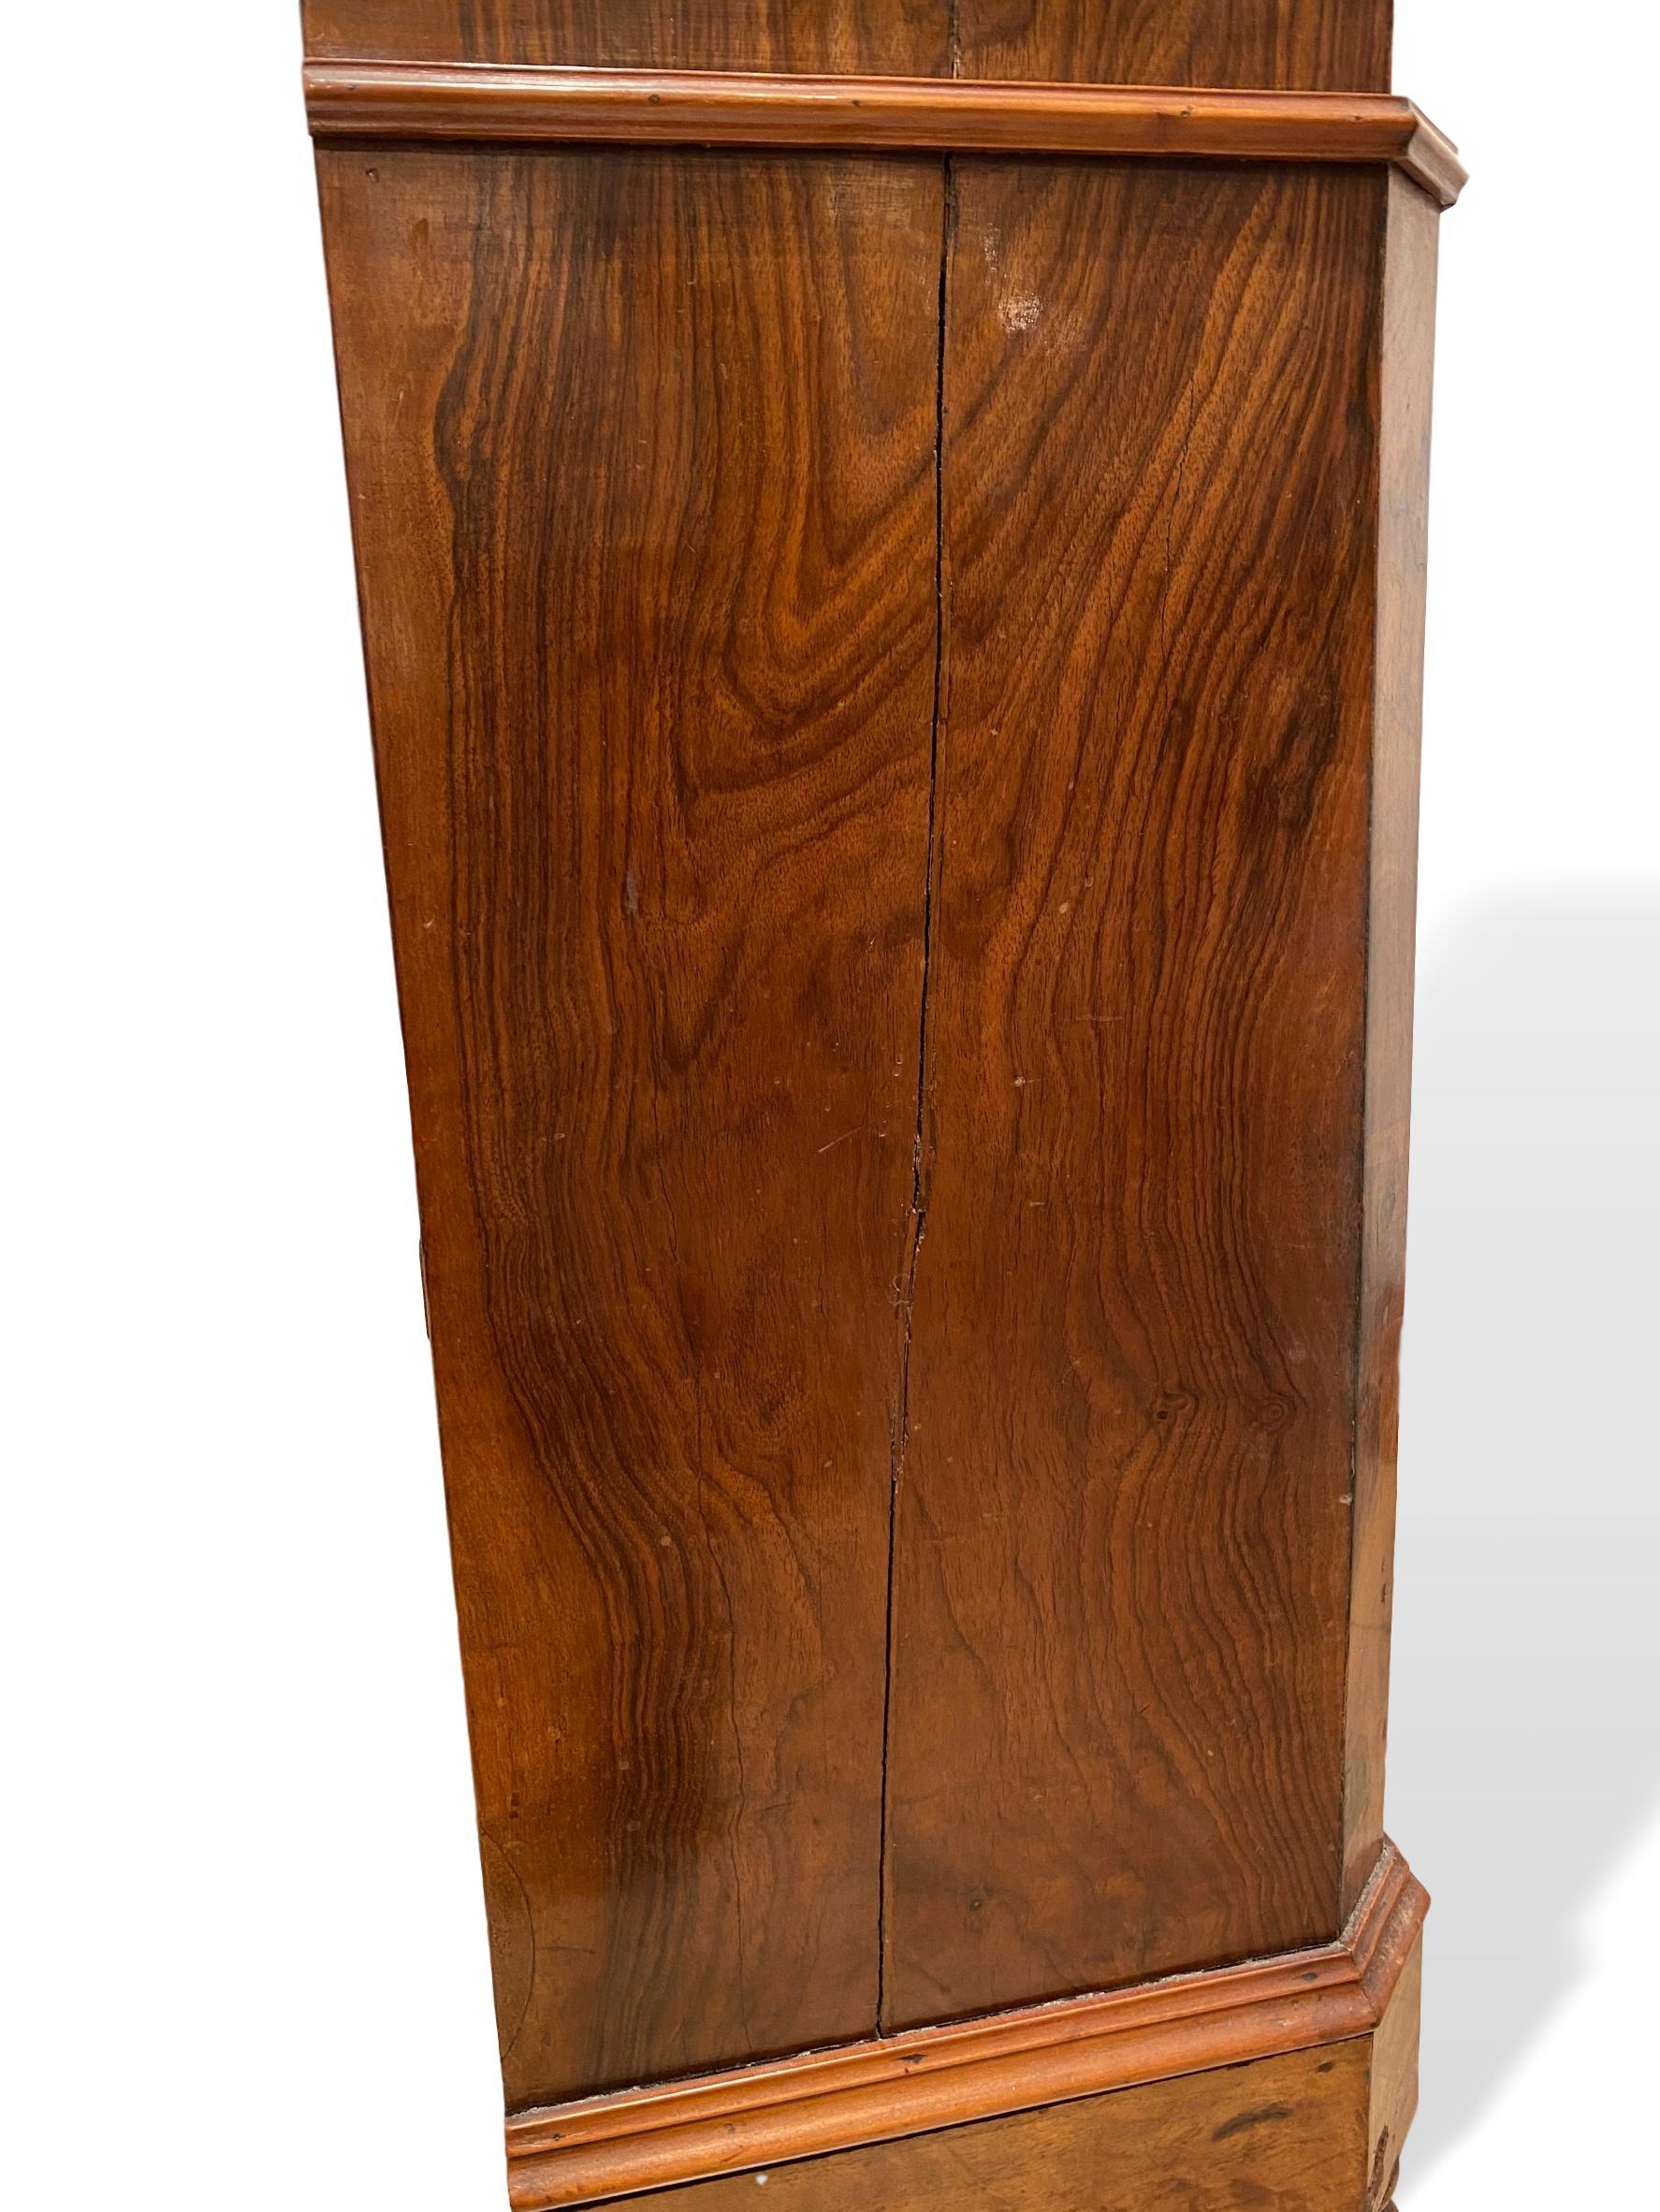 19th Century Marble-Top Side Cabinet, Figured Burl Walnut with Marquetry Inlay, Italian, 1880